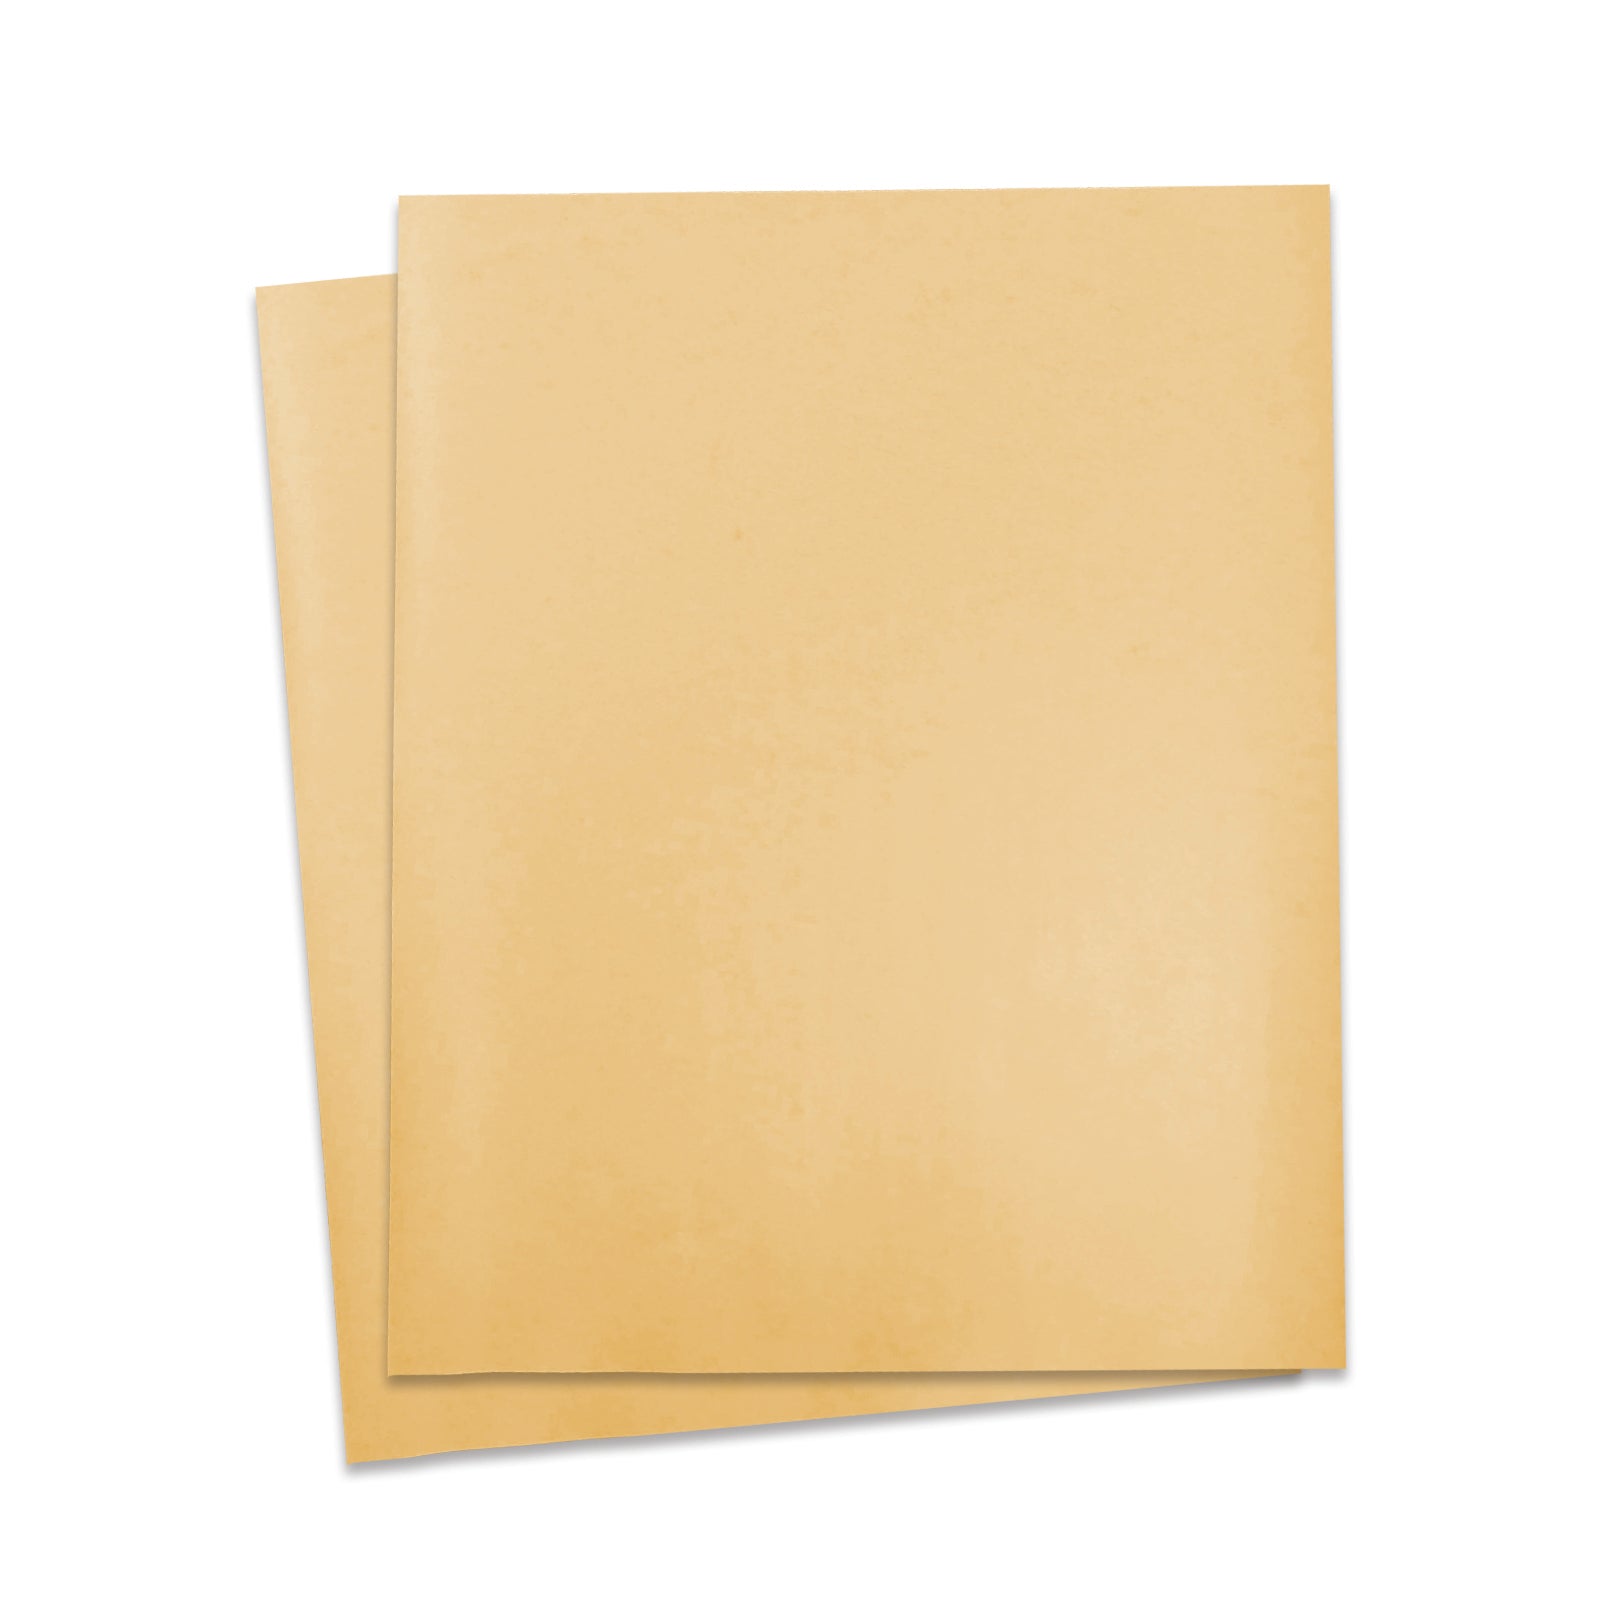 Silicone Parchment Paper for Heat Transfer Applications 11x17 100 SHEETS